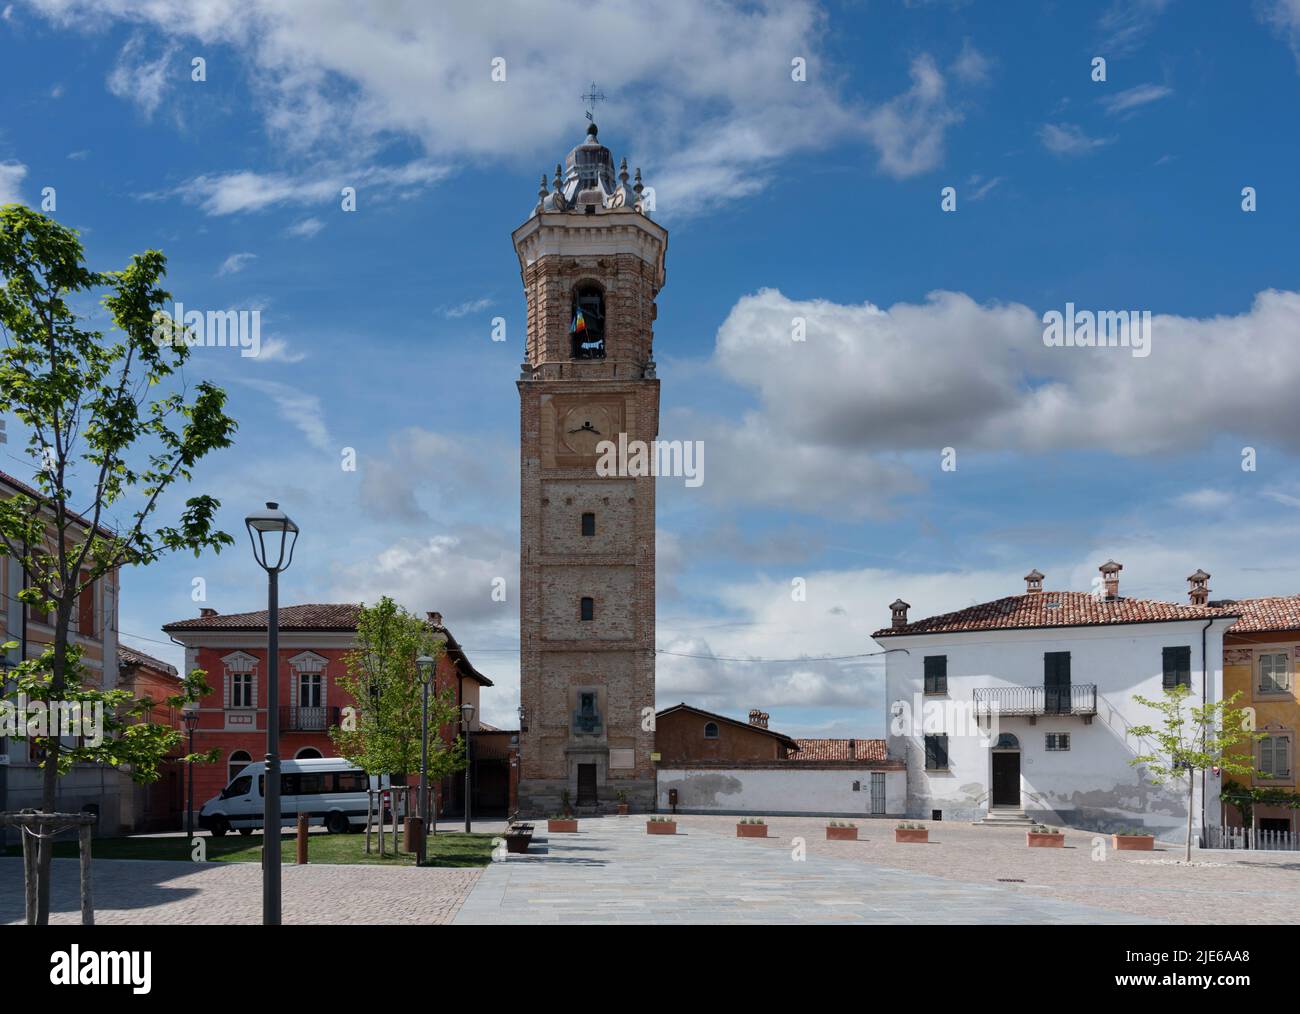 La Morra, Langhe, Piedmont, Italy: Castle square with the bell tower or civic tower (18th century) with clock, blue sky with clouds Stock Photo